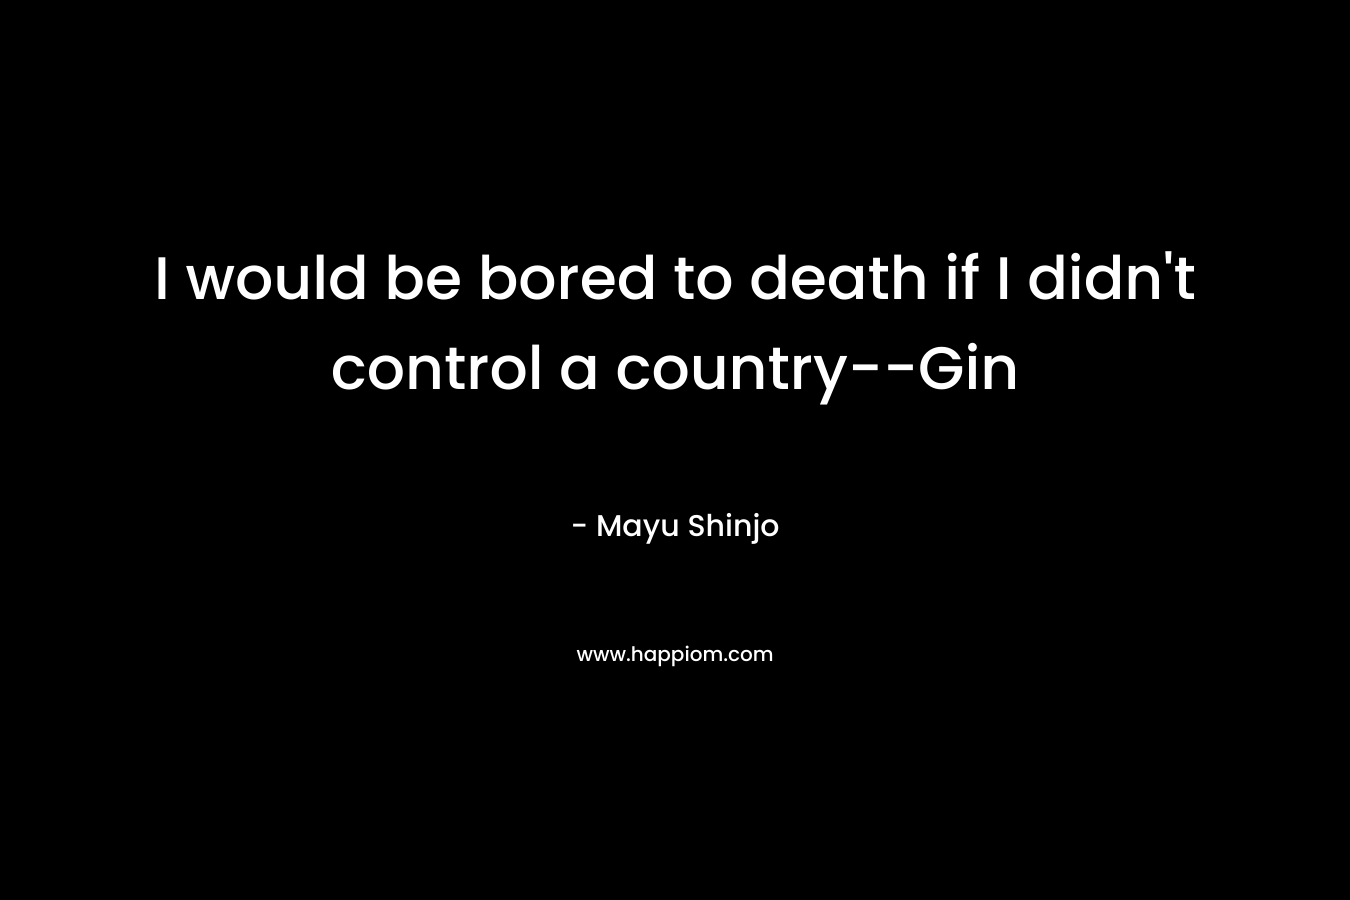 I would be bored to death if I didn't control a country--Gin